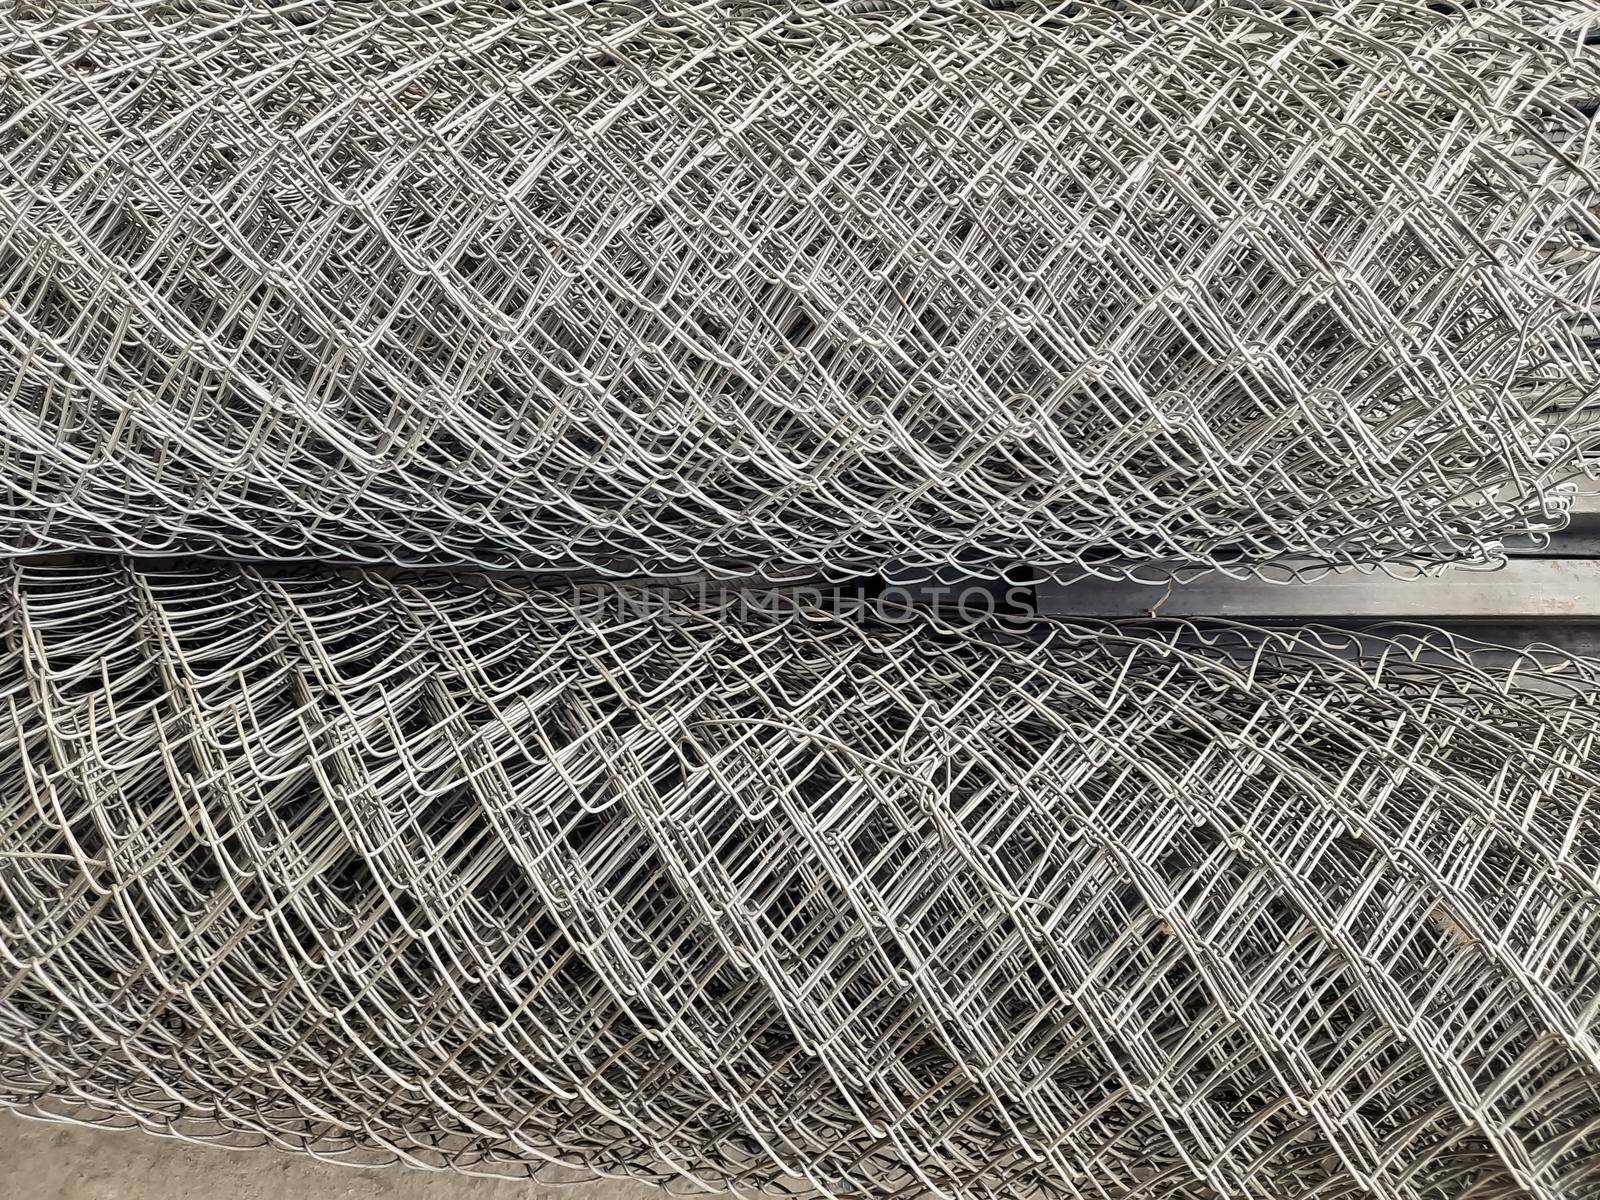 Metal bars background in diagonal lines close-up, industrial mesh of steel wire texture, building material by tabishere